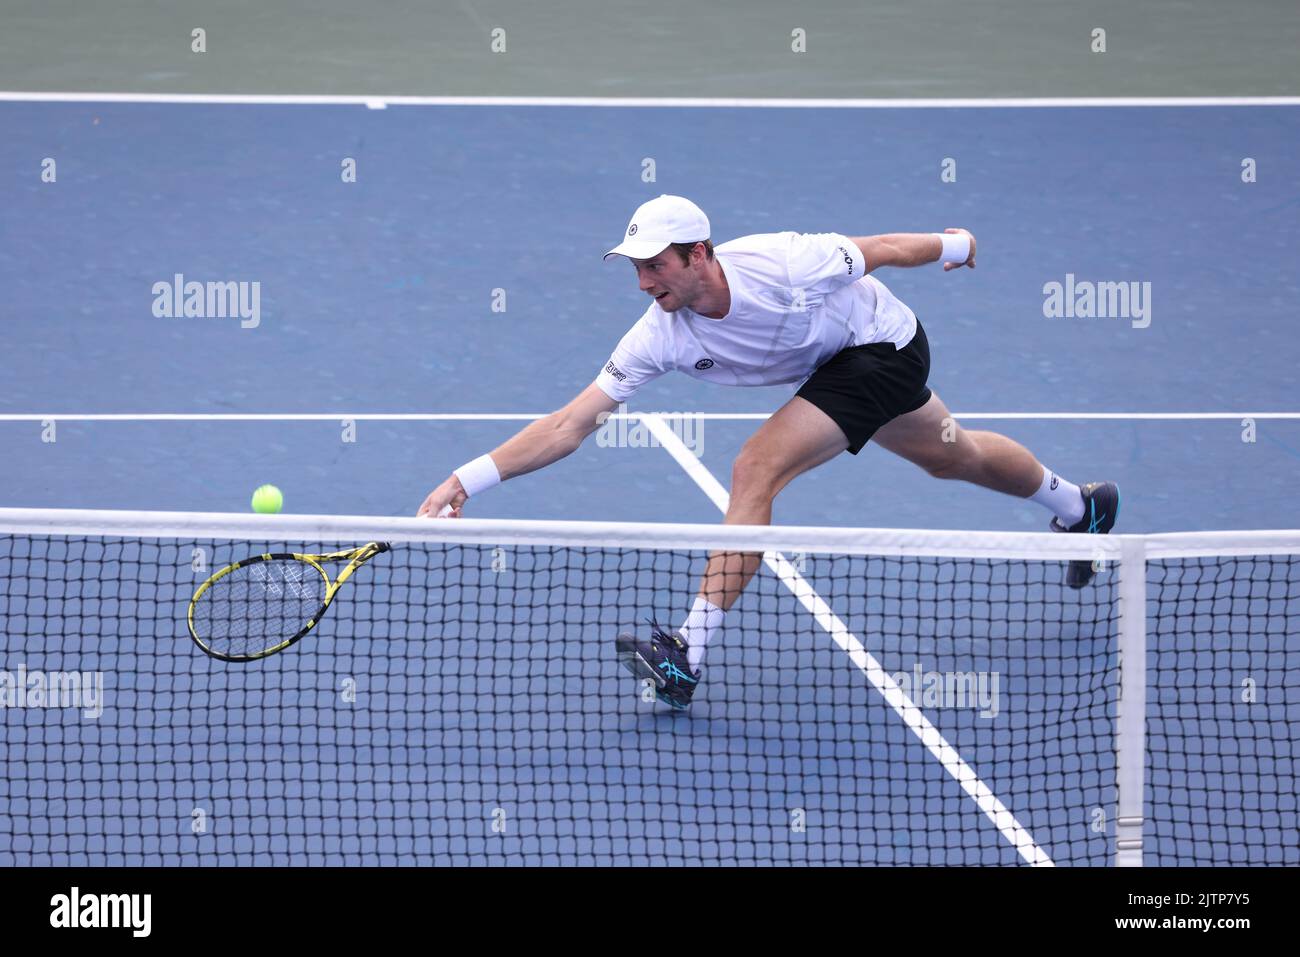 NEW YORK, NY - AUGUST 31: Botic van de Zandschulp of the Netherlands during his match against Corentin Moutet of France at USTA Billie Jean King National Tennis Center on August 31, 2022 in New York City. (Photo by Adam Stoltman/BSR Agency) Stock Photo